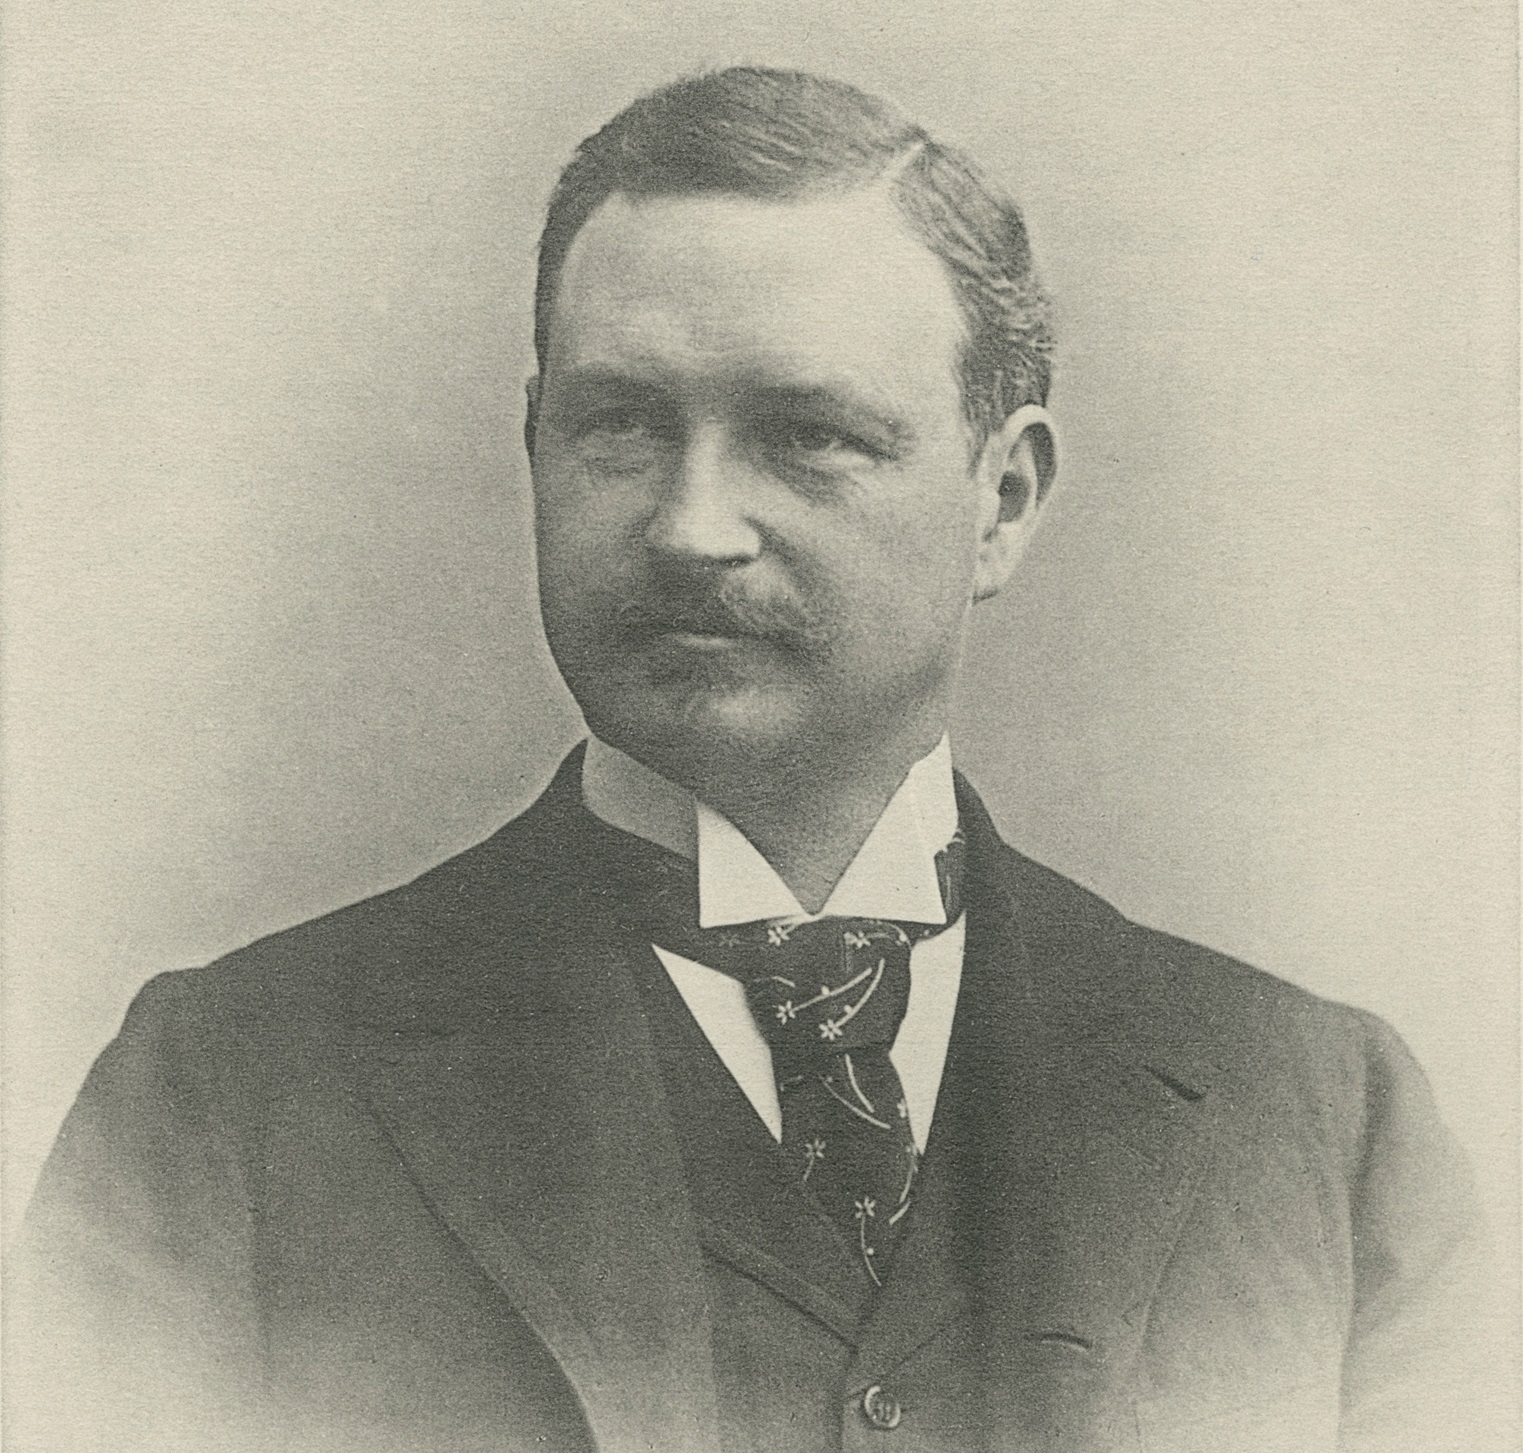 Basel banker Alfons Ehinger was Lonza’s first president.